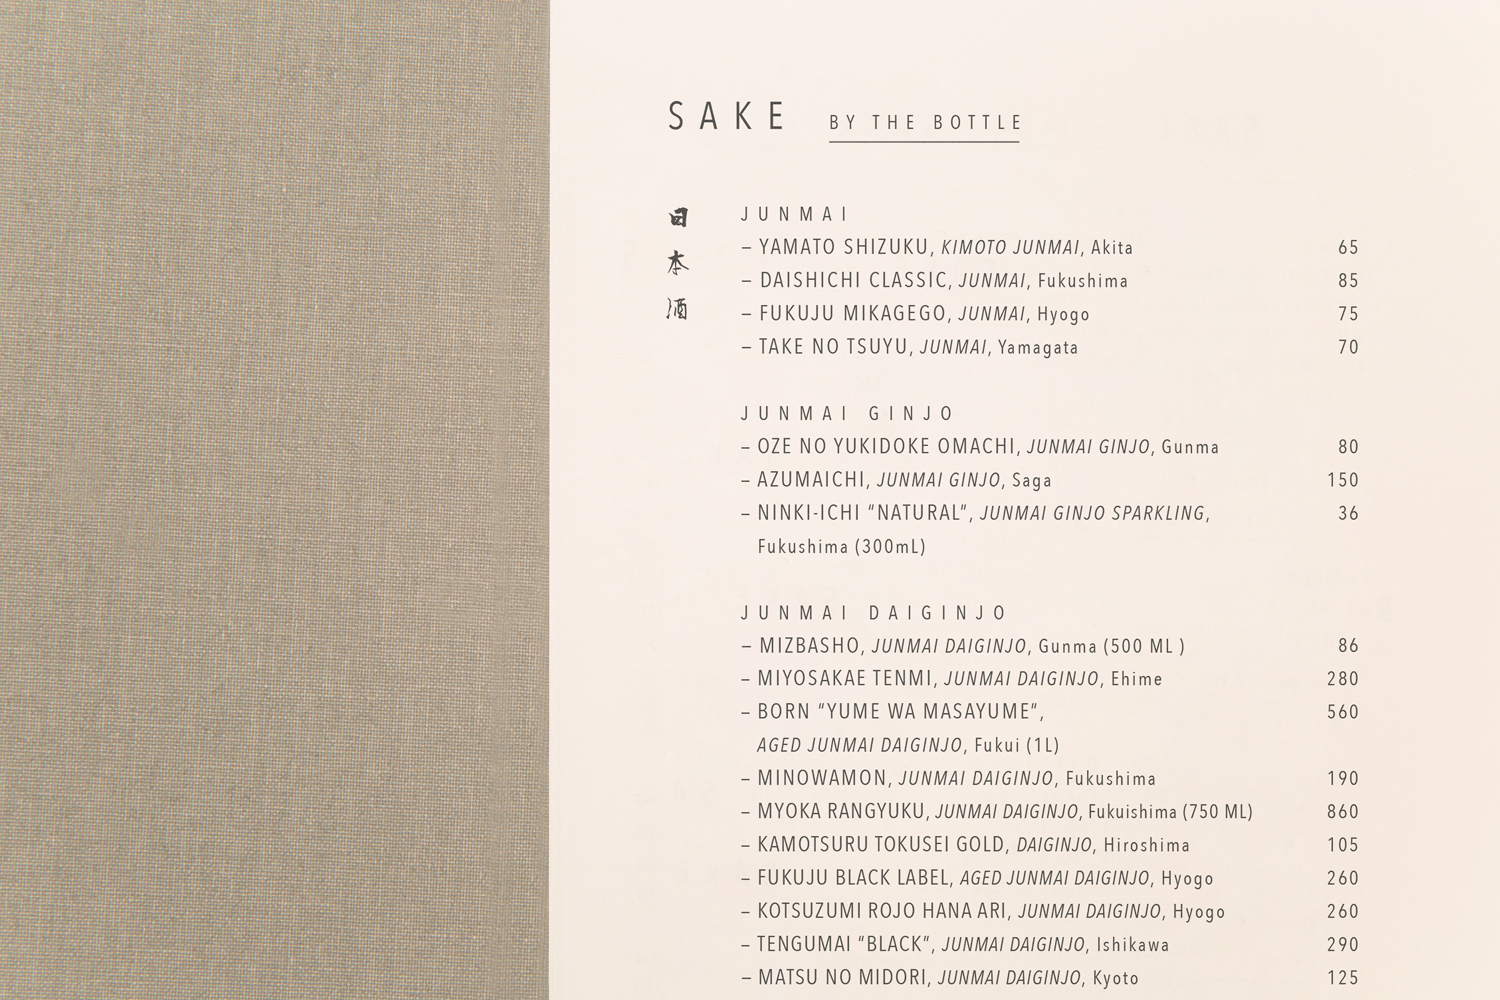 Logo, menus, stationery and scented disk designed by Savvy for New York restaurant Omakase Room by Tatsu